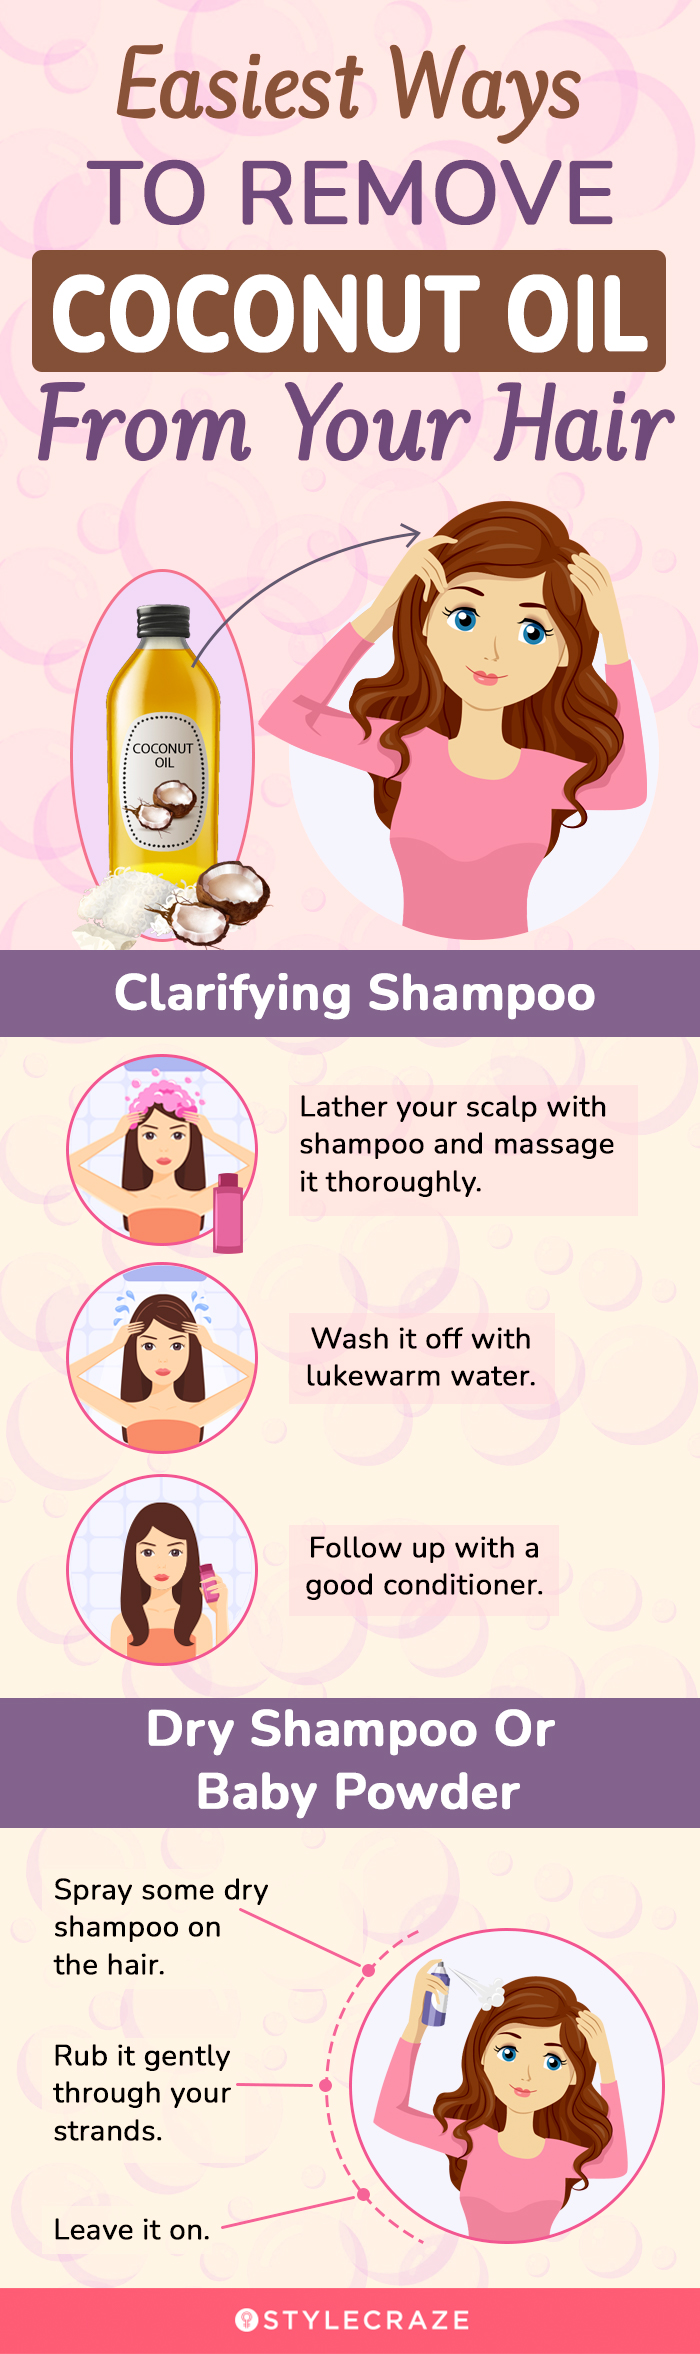 easiest ways to remove coconut oil from your hair (infographic)